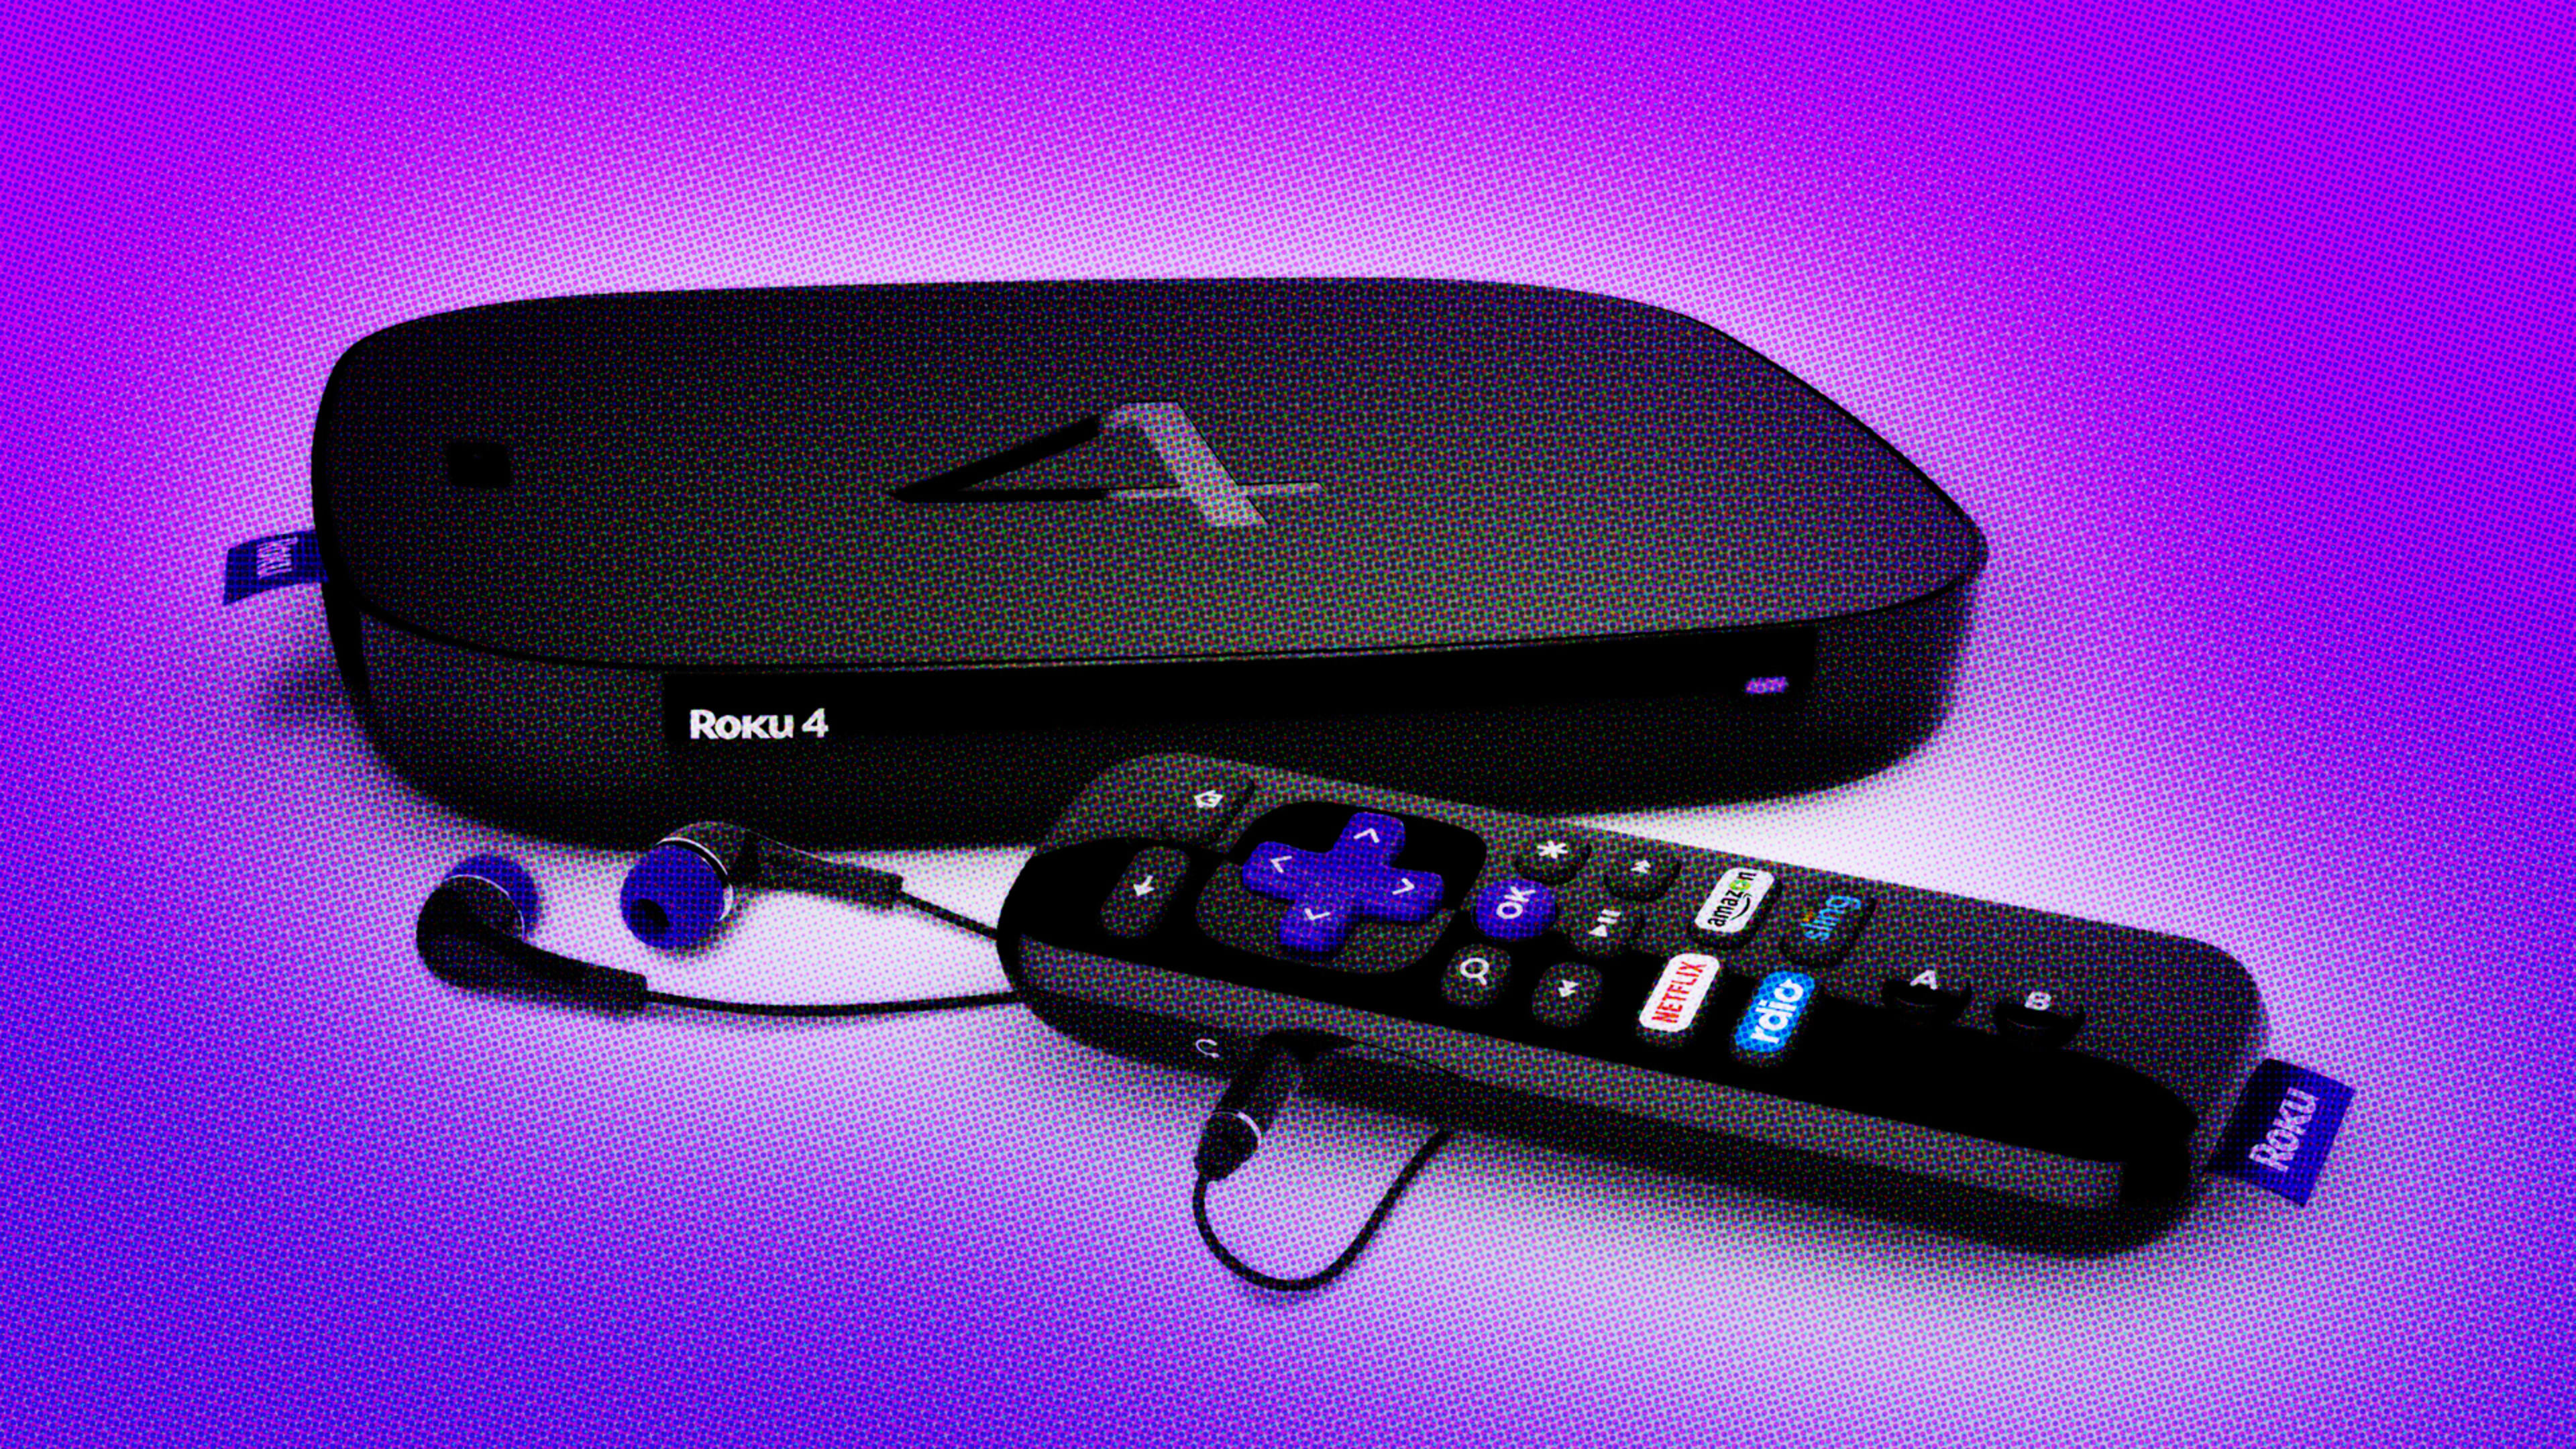 Roku 4 Solves The Most Frustrating Thing About Streaming TV Boxes